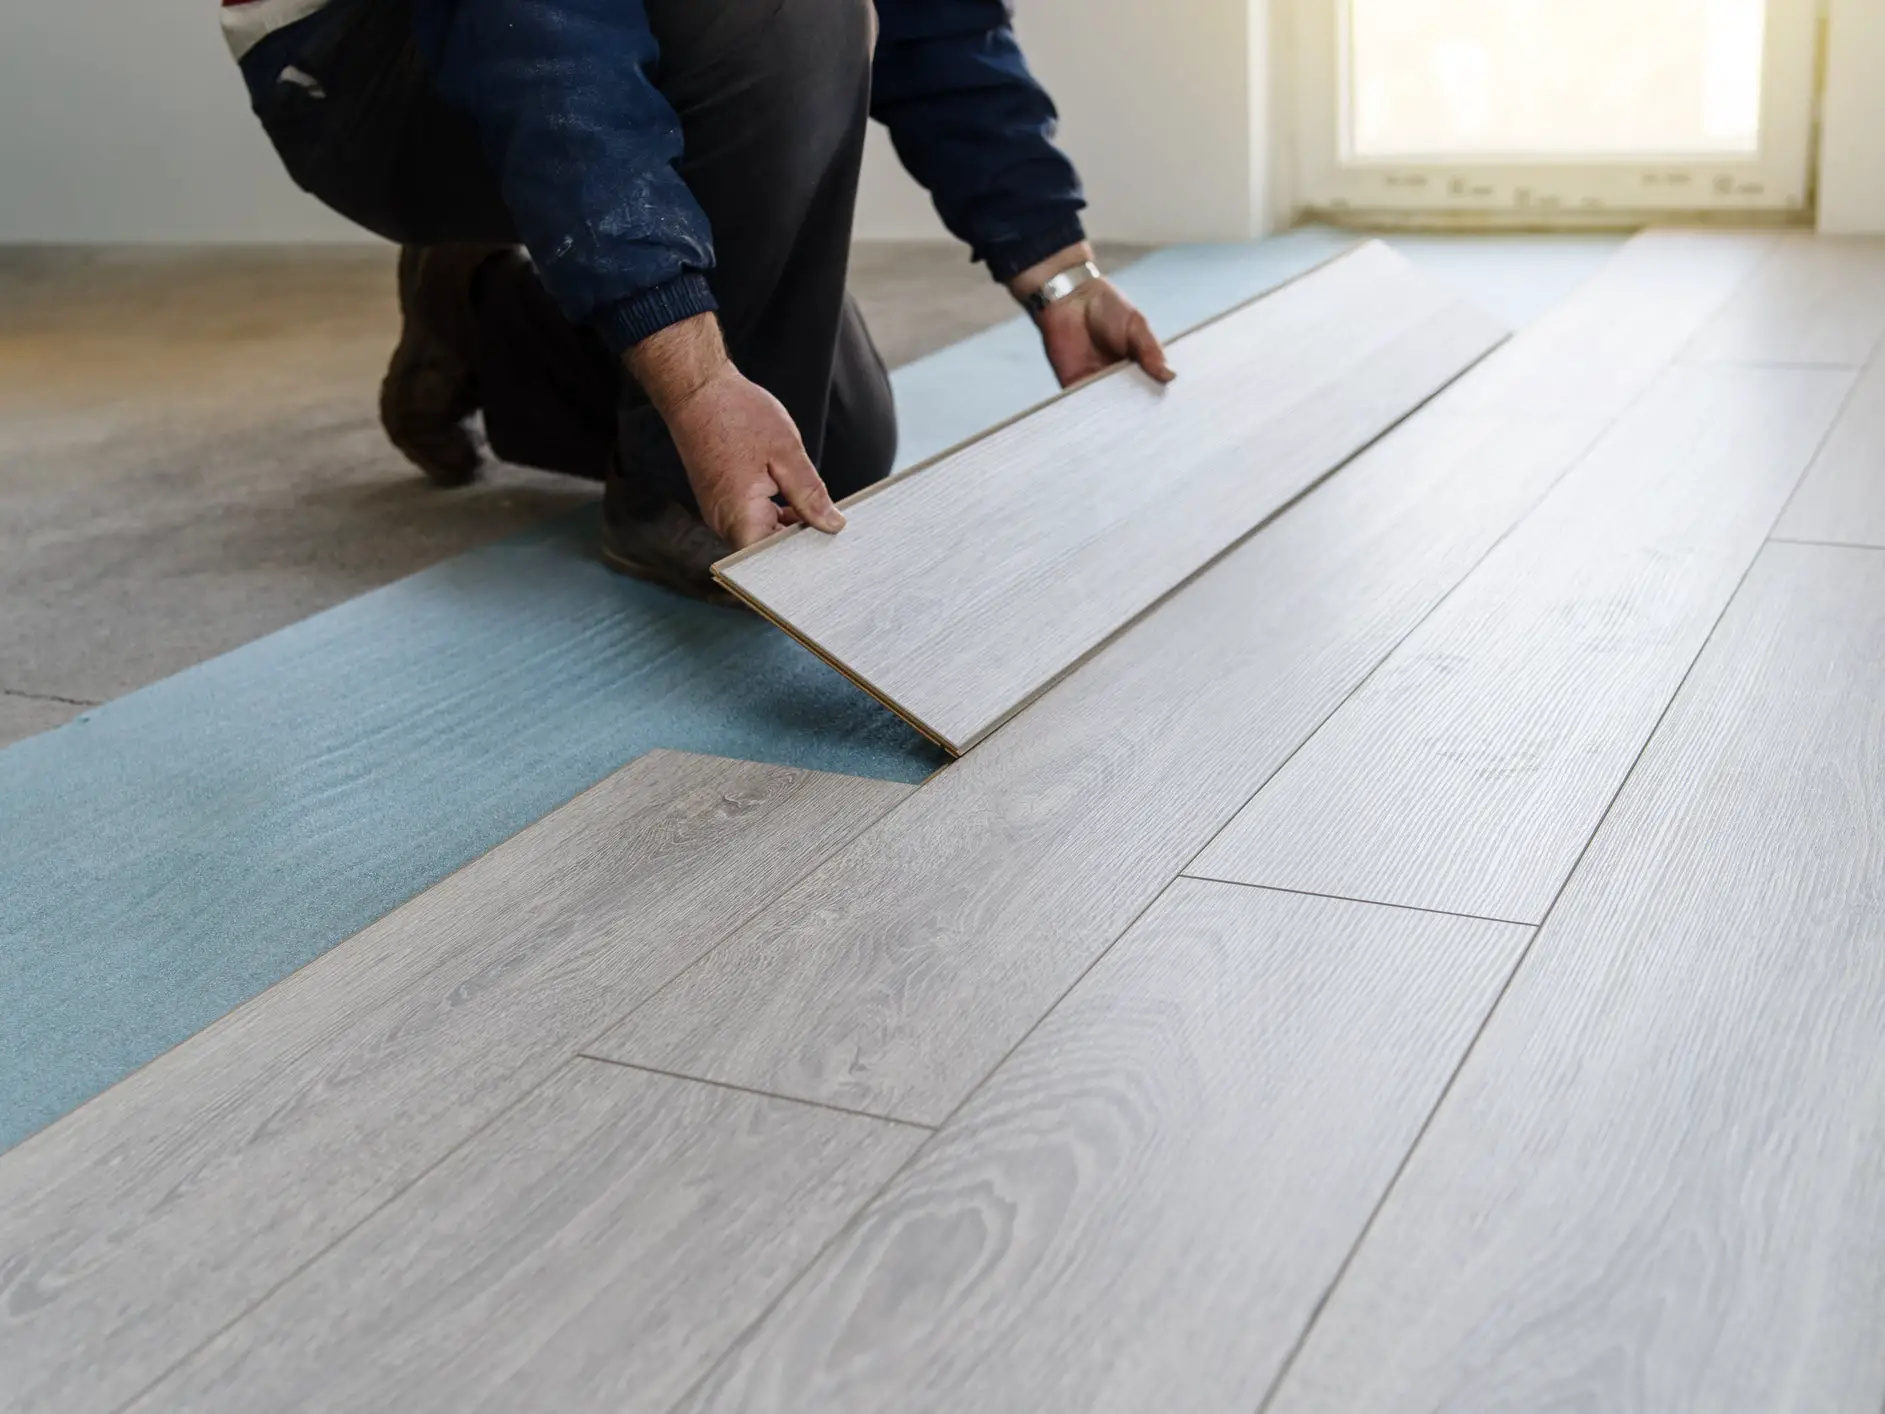 How To Install Temporary Flooring Over, How To Lay Carpet Over Laminate Flooring